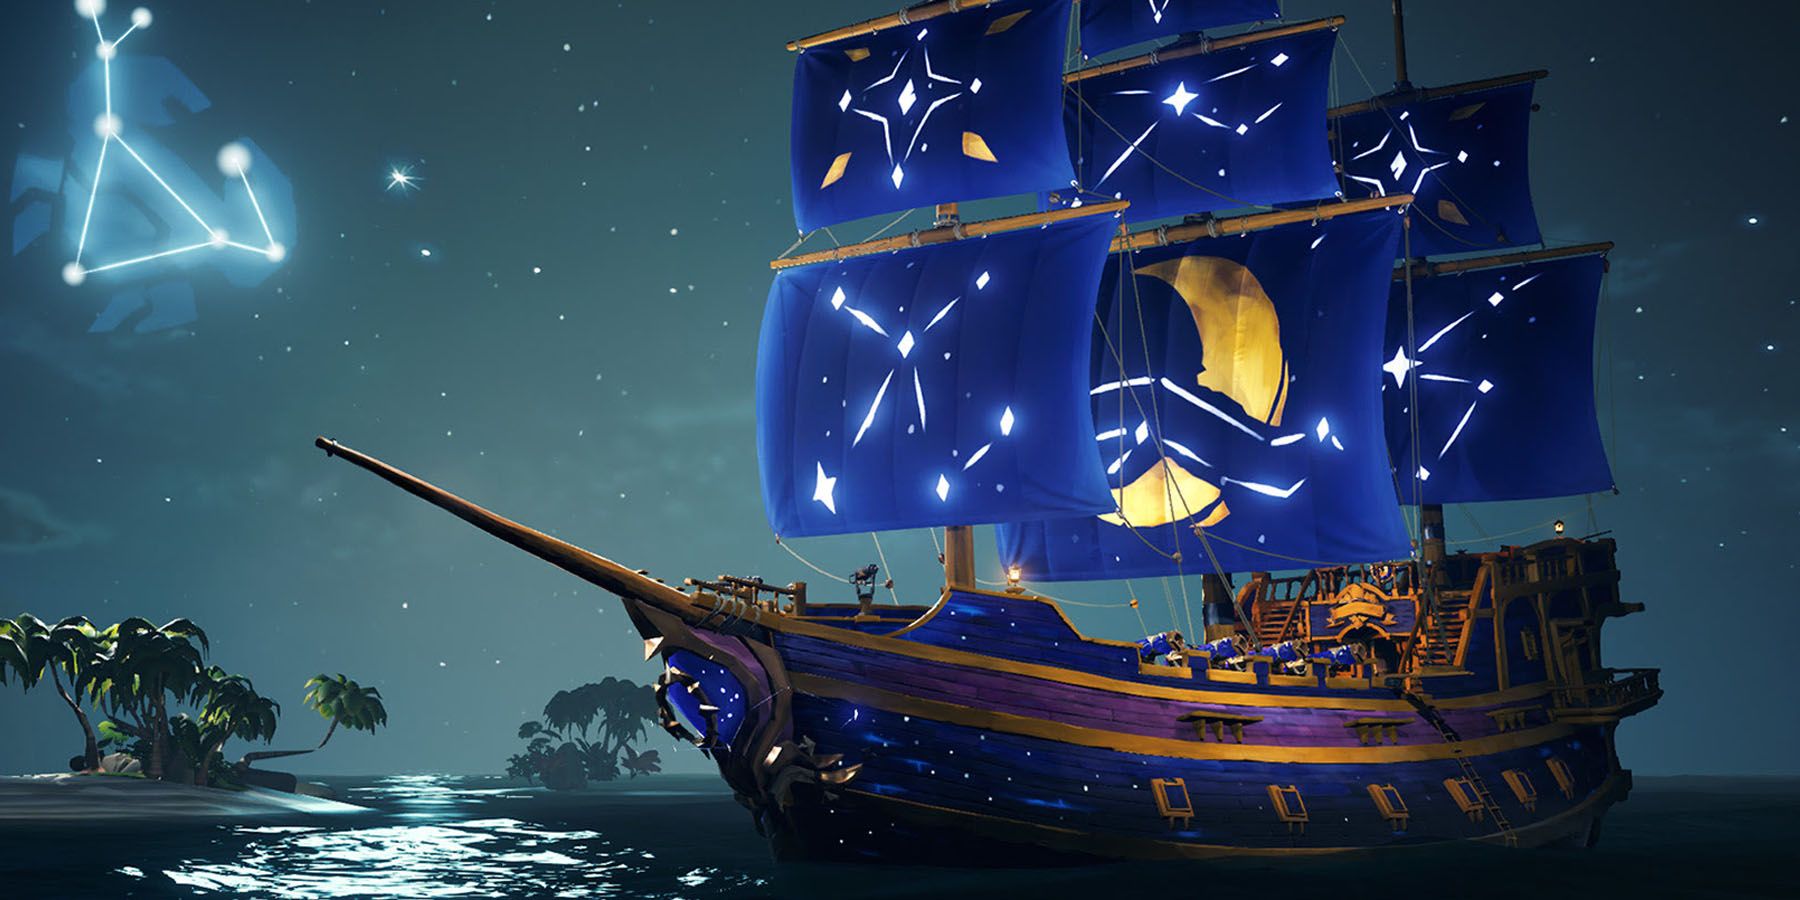 Sea of Thieves is Now Selling a Glowing Lodestar Ship in the